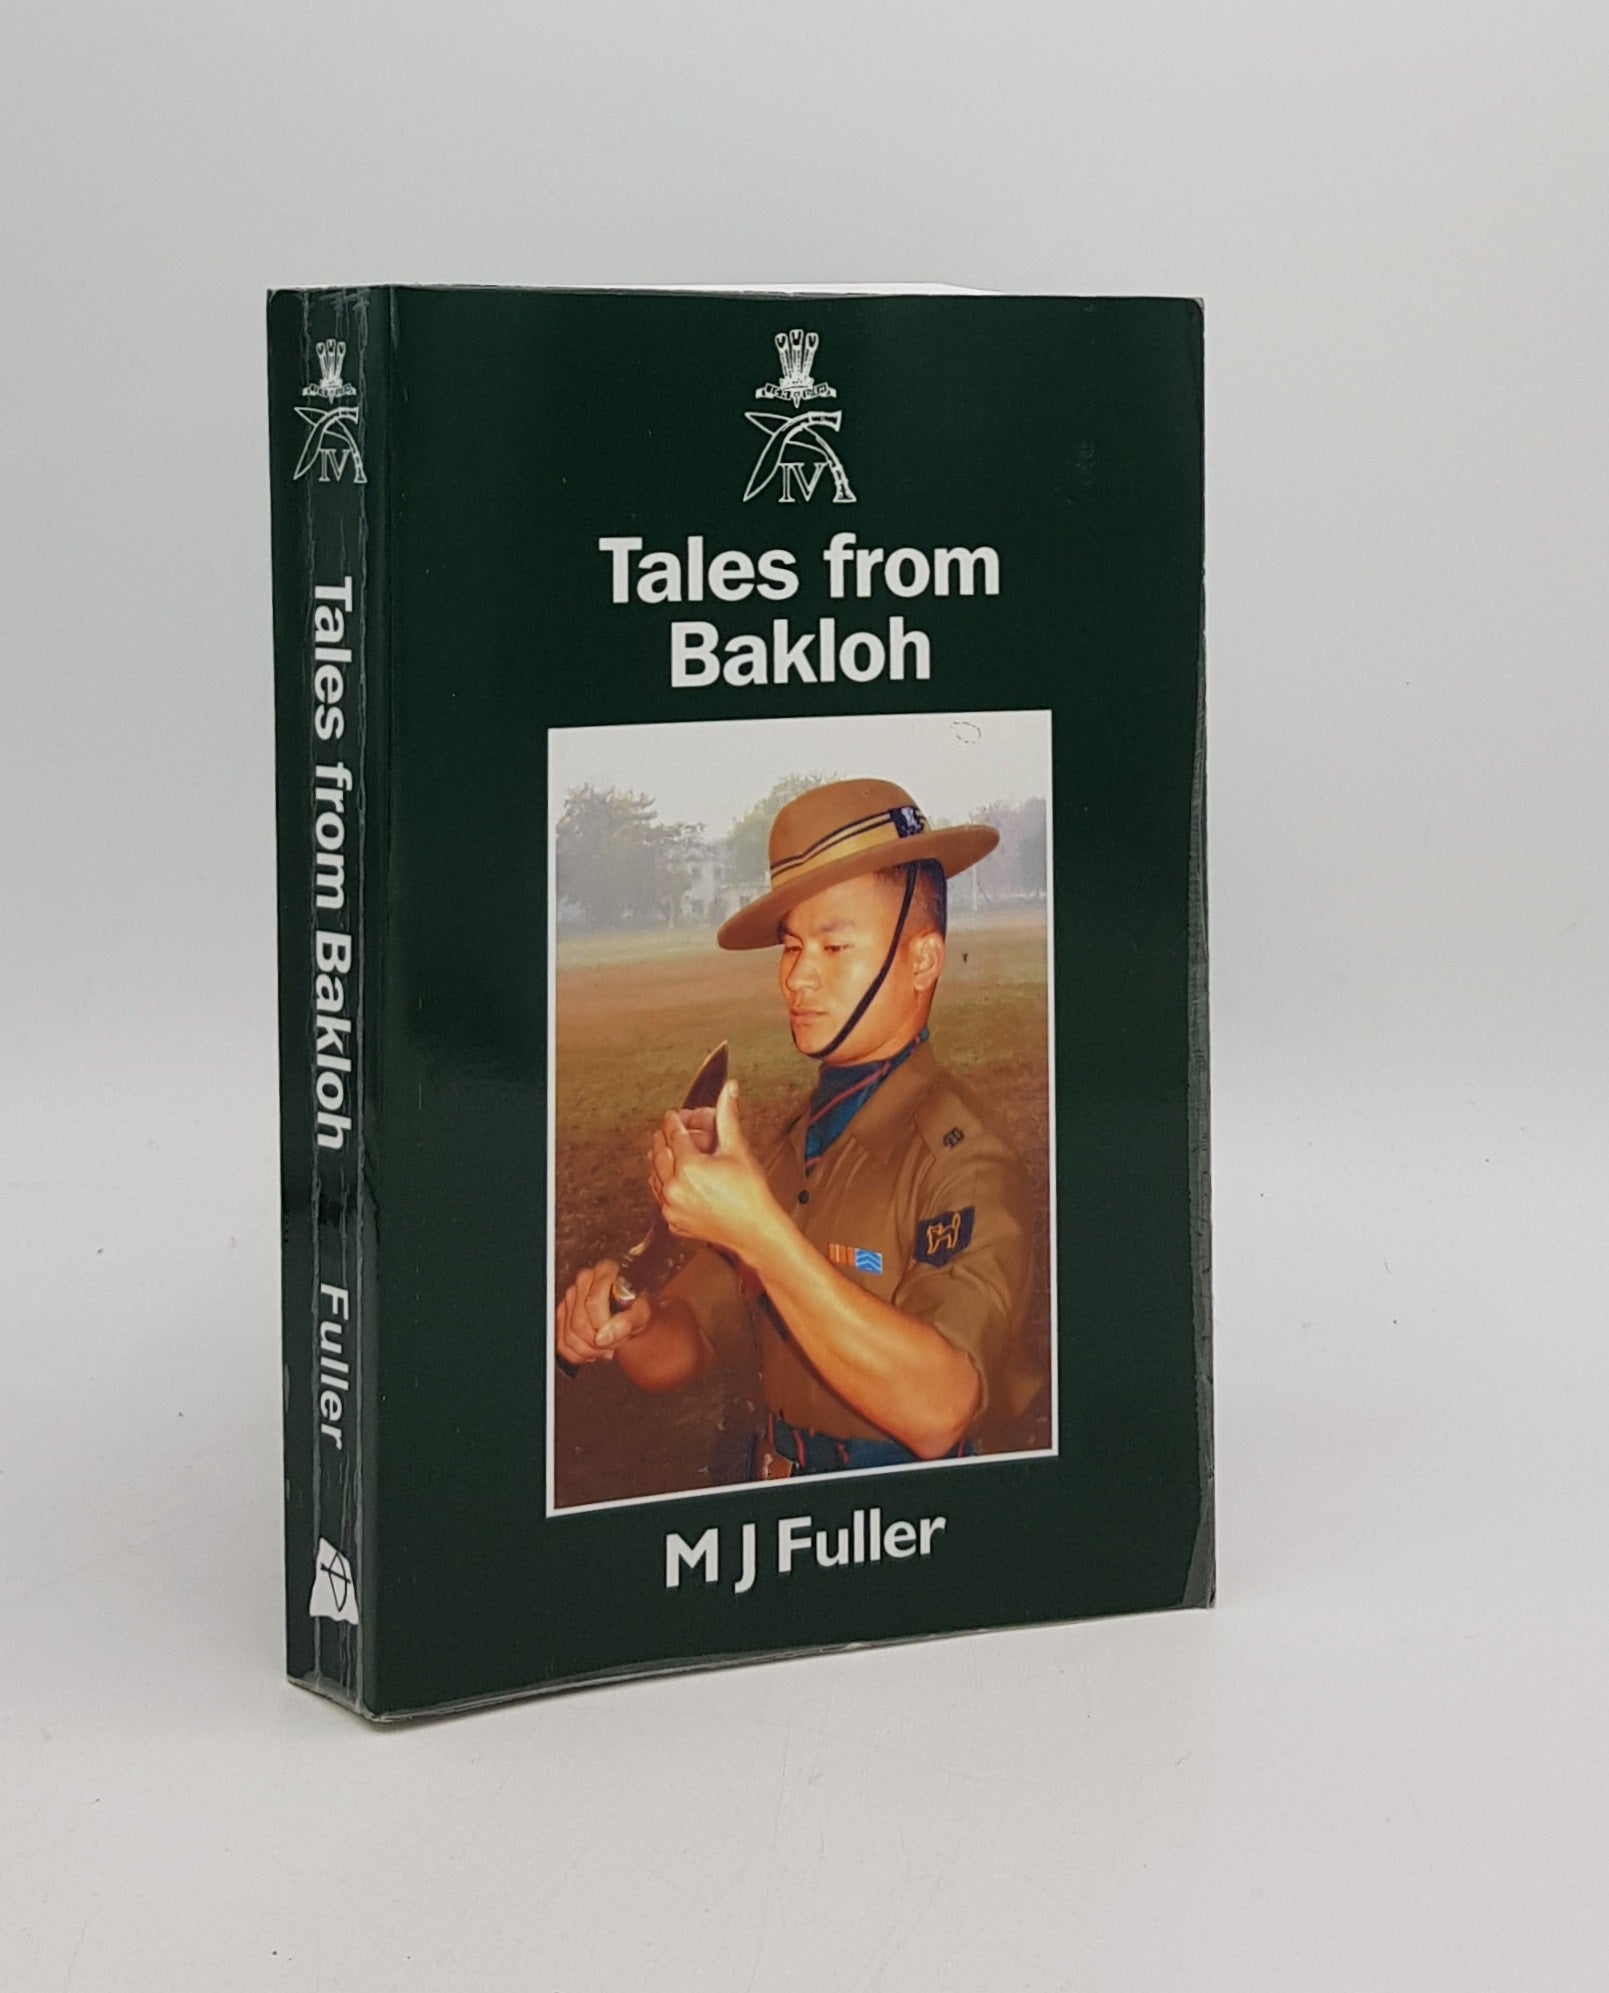 FULLER M.J. - Tales from Bakloh Recollections from the Newsletters of the 4th Prince of Wales's Own Gurkha Rifles Officers' Association 1947-2007